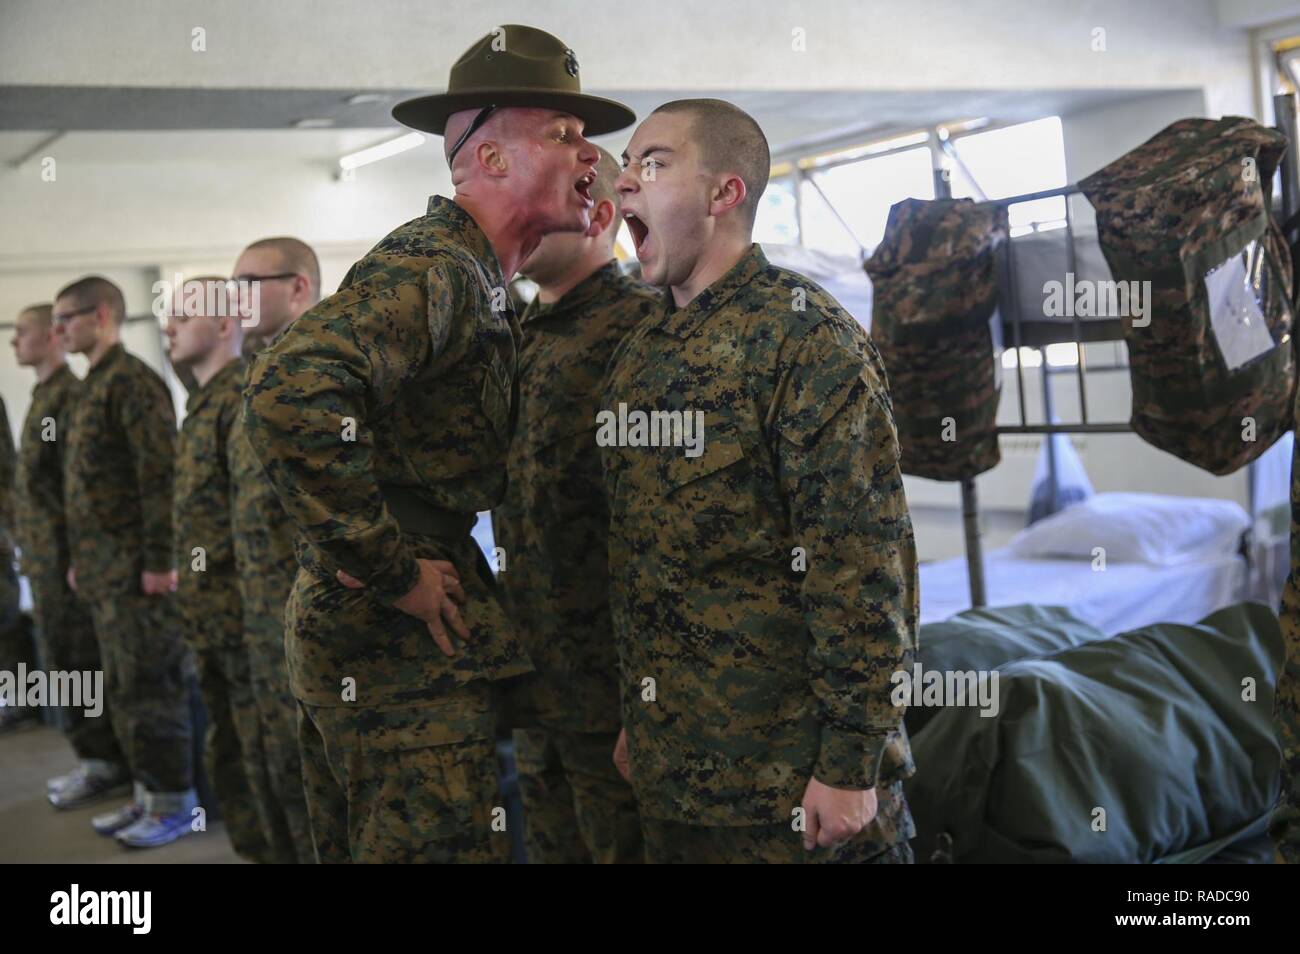 A drill instructor with Kilo Company, 3rd Recruit Training Battalion, instructs a recruit to respond louder during pick up at Marine Corps Recruit Depot San Diego, Jan. 27. The recruits will spend pick up with their drill instructors learning the rules and regulations of recruit training, regarding everything from how to act in the squad bay to how to speak to drill instructors. Annually, more than 17,000 males recruited from the Western Recruiting Region are trained at MCRD San Diego. Kilo Company is scheduled to graduate April 21. Stock Photo